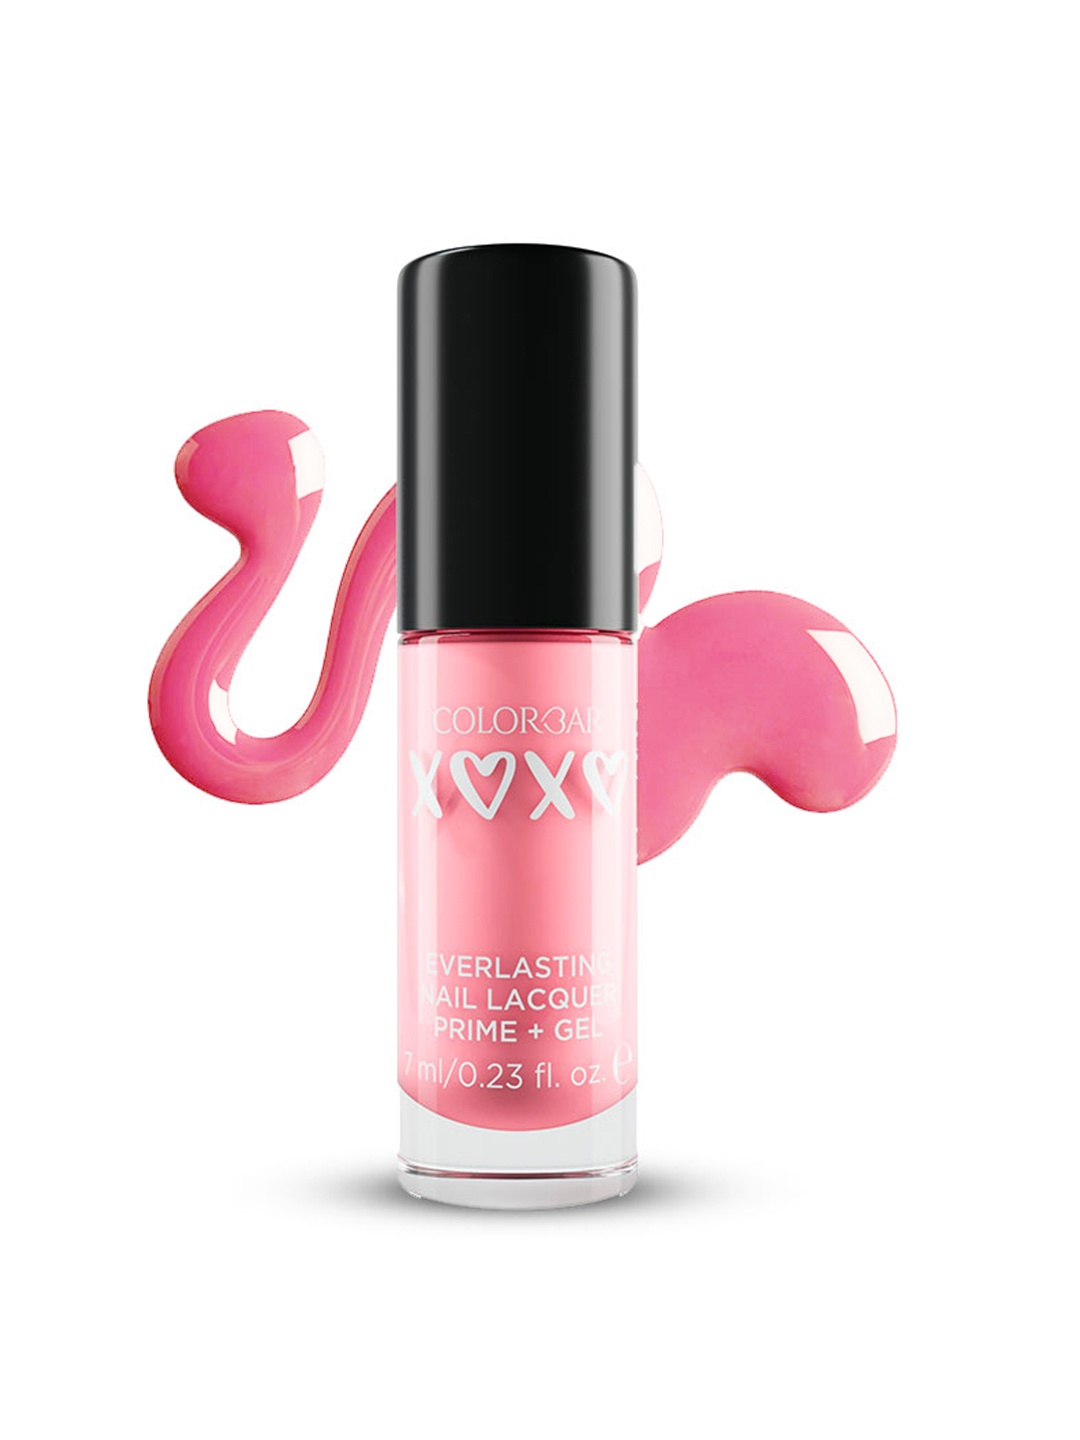 

Colorbar XOXO Everlasting Prime + Gel Nail Lacquer 7 ml - Pearly Night 015, Pink